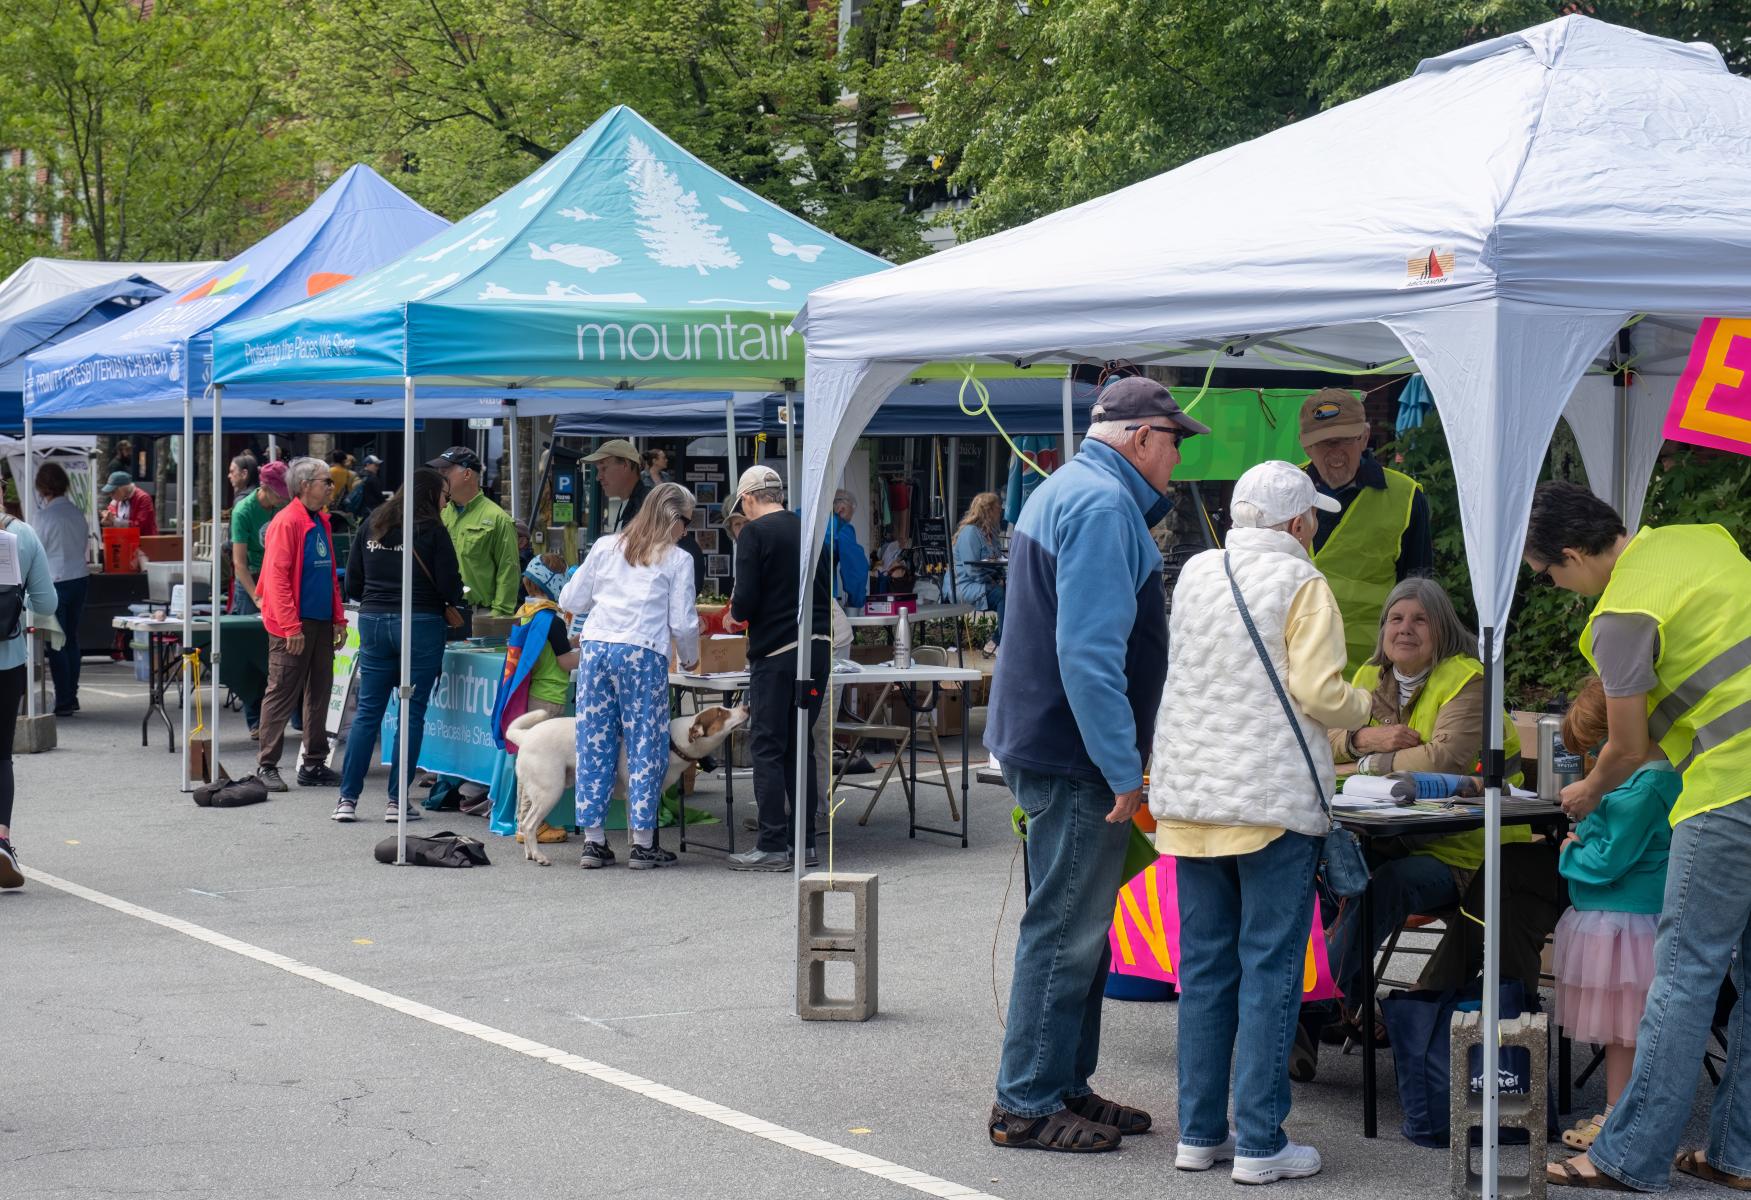 The festival brings a multitude of vendors for participants to engage and learn.